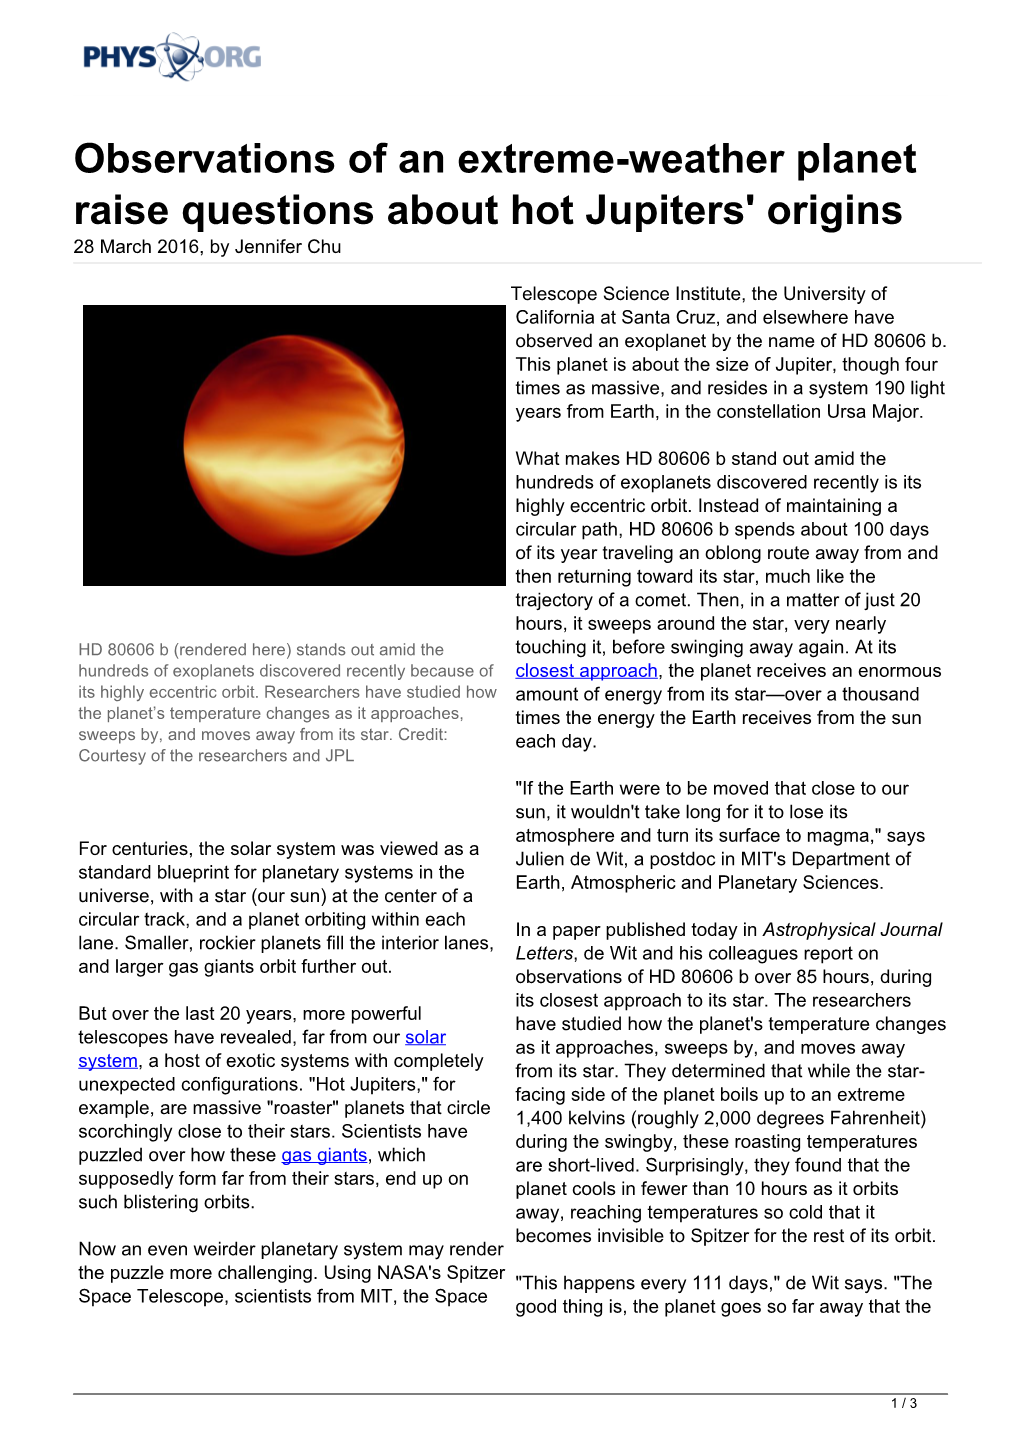 Observations of an Extreme-Weather Planet Raise Questions About Hot Jupiters' Origins 28 March 2016, by Jennifer Chu